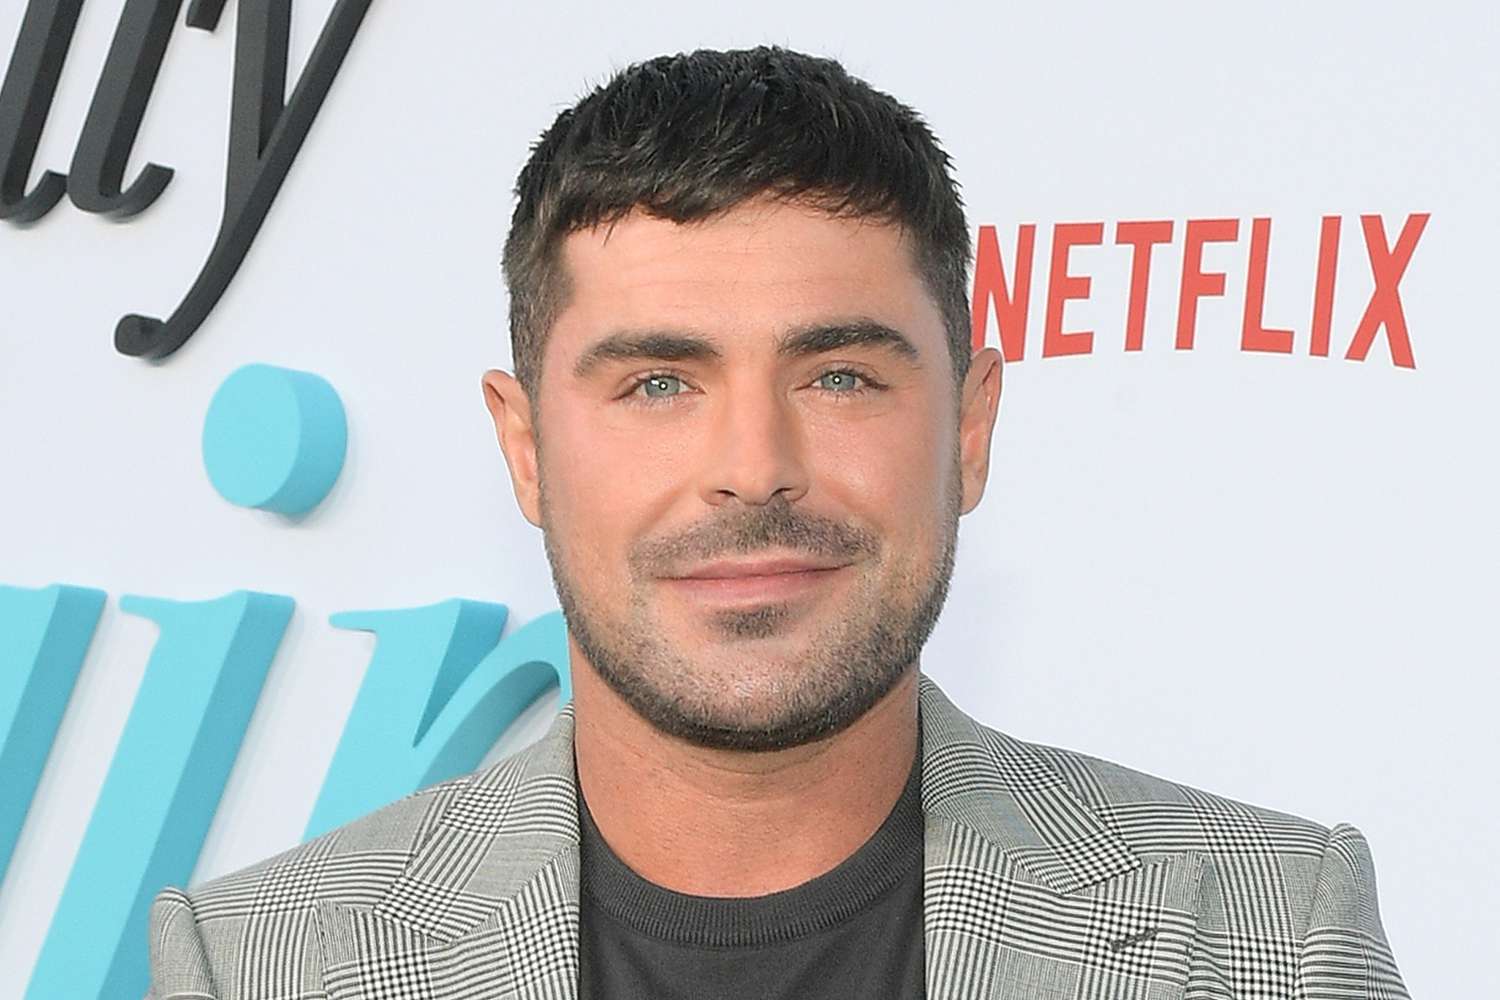 Zac Efron hospitalized after 'minor swimming incident' in Ibiza